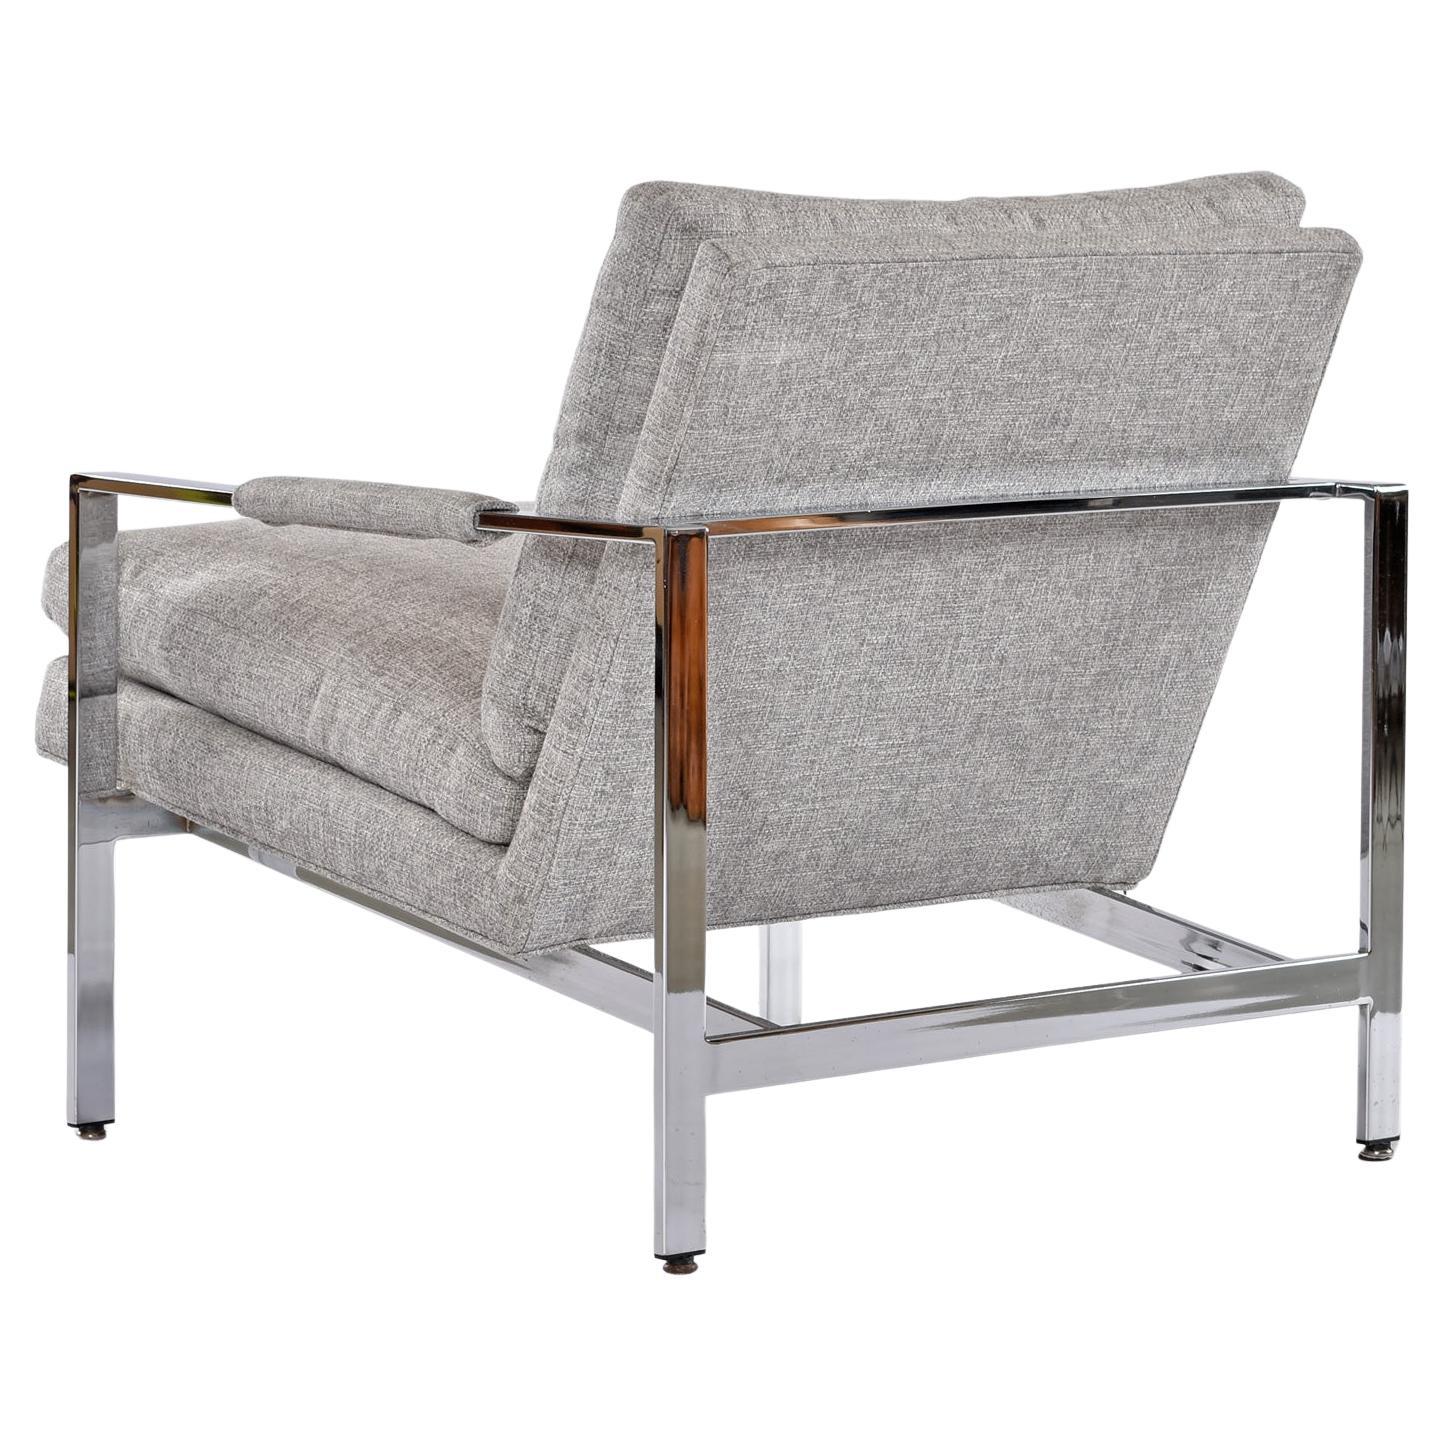 Late 20th Century Milo Baughman For Thayer Coggin 951 Flat Bar Chrome Lounge Chairs in Grey Tweed For Sale